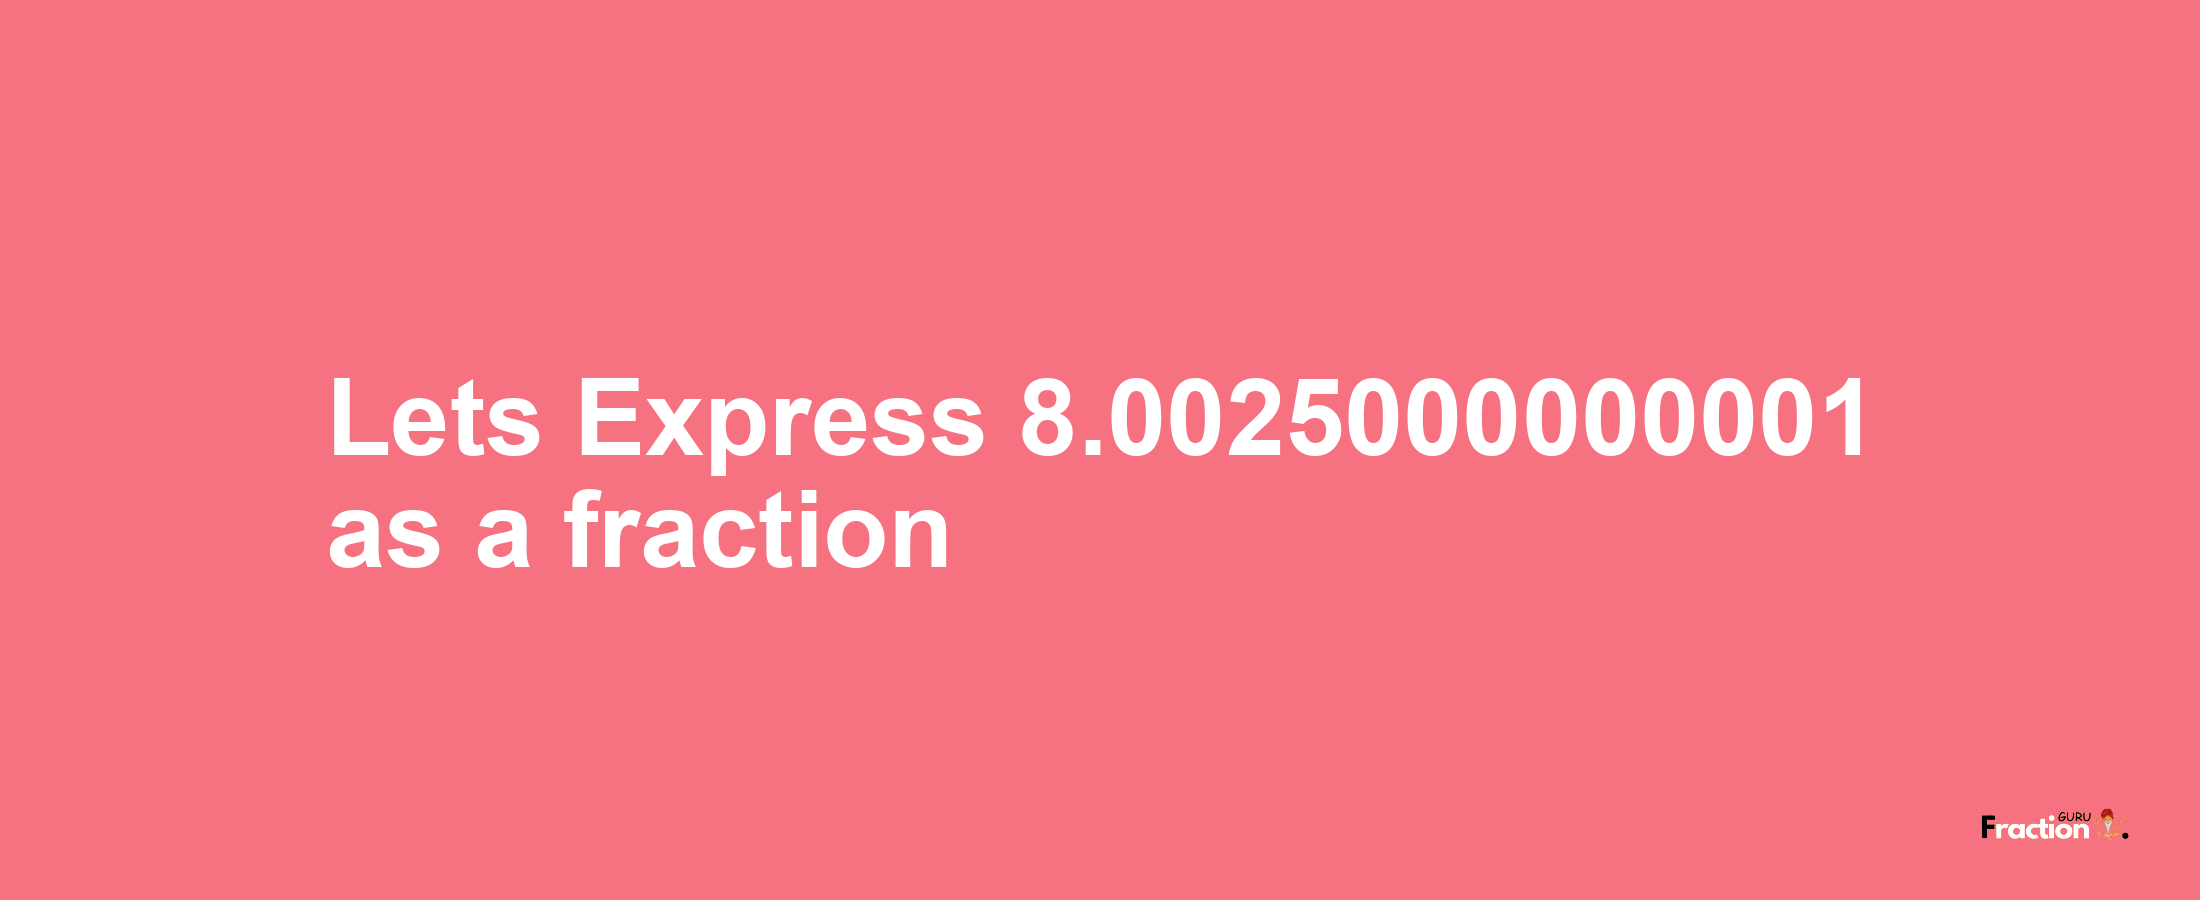 Lets Express 8.0025000000001 as afraction